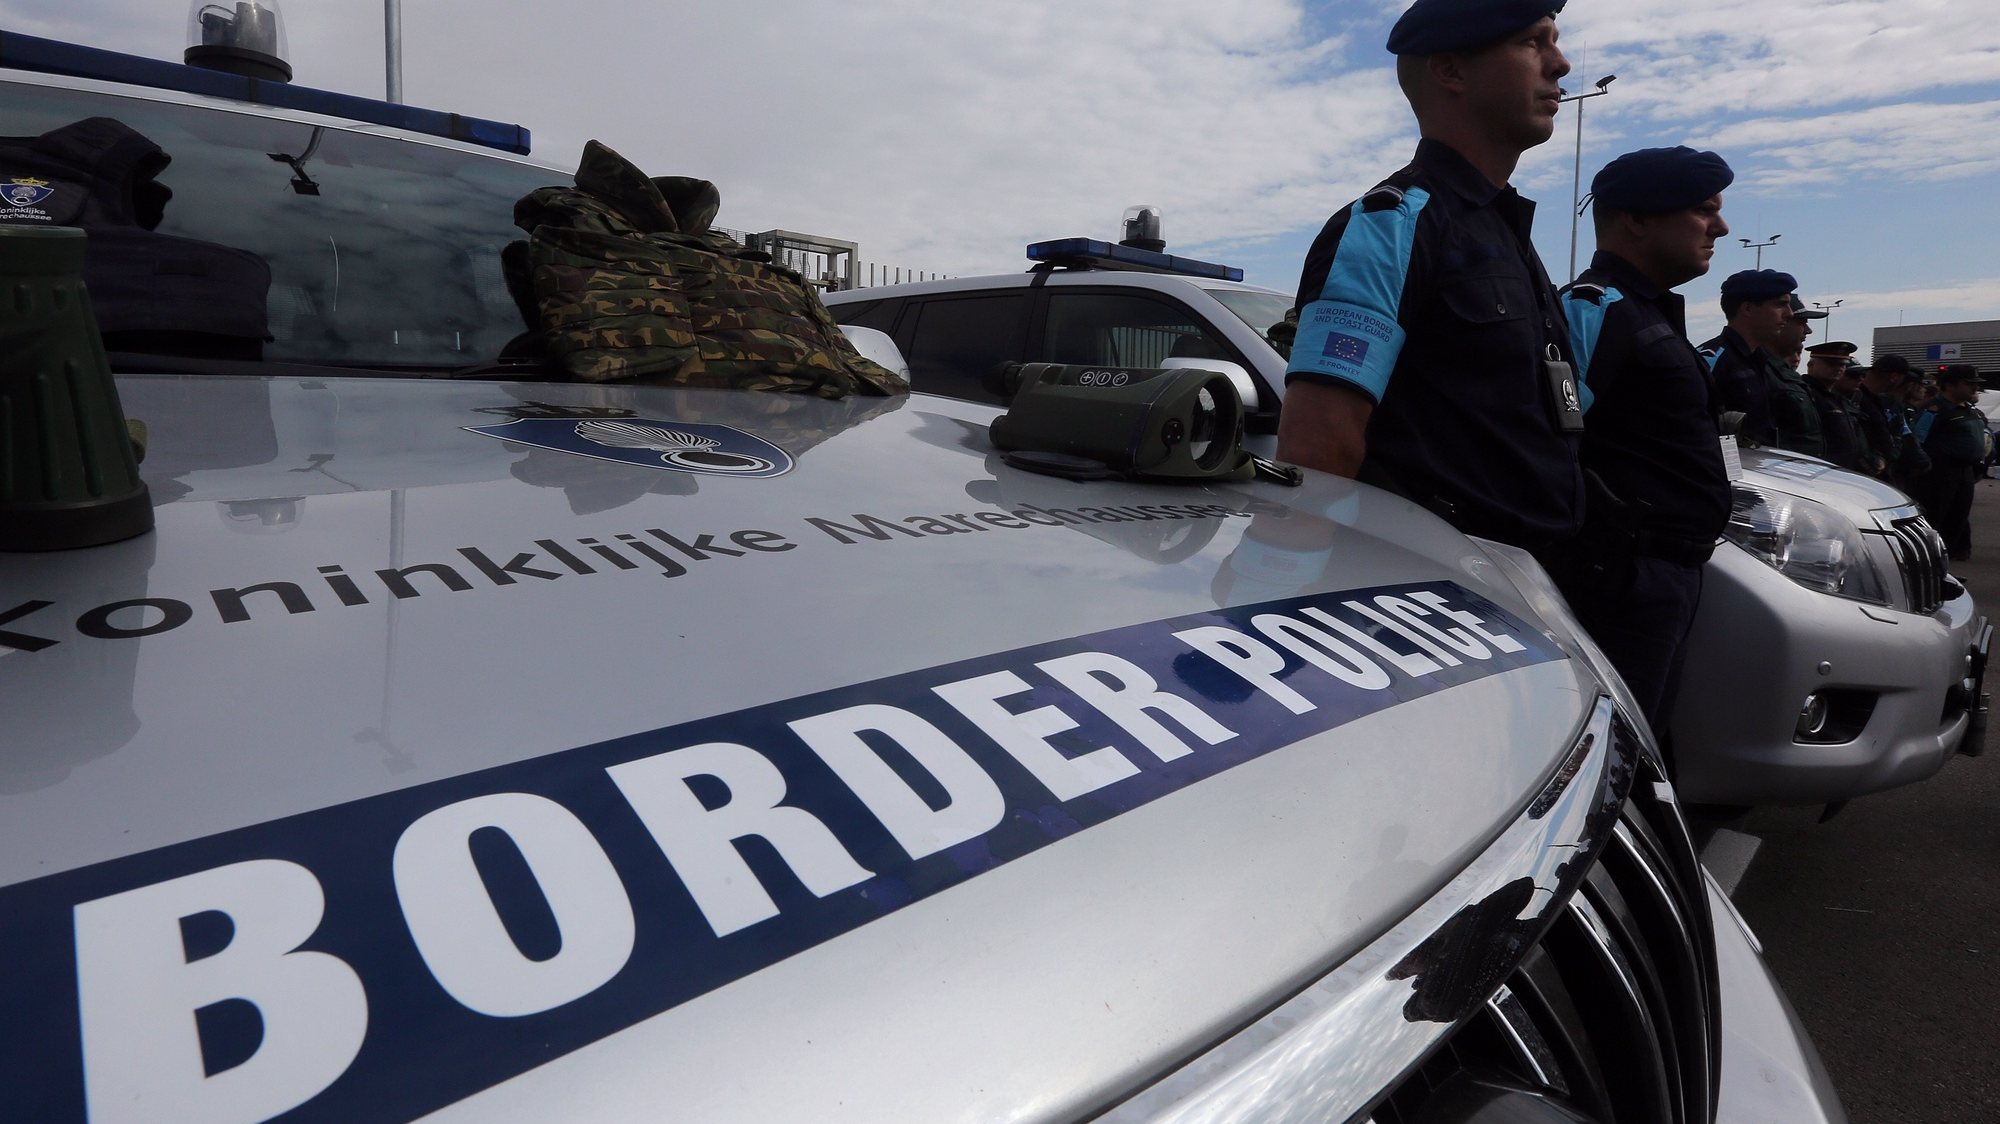 epa07468431 (FILE) - Police officers of European Border and Coast Guard stand on duty, during the official launch of the European Border and Coast Guard, in Kapitan Andreevo Check Point, on the borders of Bulgaria with Turkey, 06 October 2016 (reissued 28 March 2019). To protect Europe&#039;s external borders, the EU&#039;s Frontex border patrol force is to be expanded to up to 10,000 troops by 2027, according to announcements by participants in the negotiations between EU states and the European Parliament on 28 March 2019.  EPA/ORESTIS PANAGIOTOU